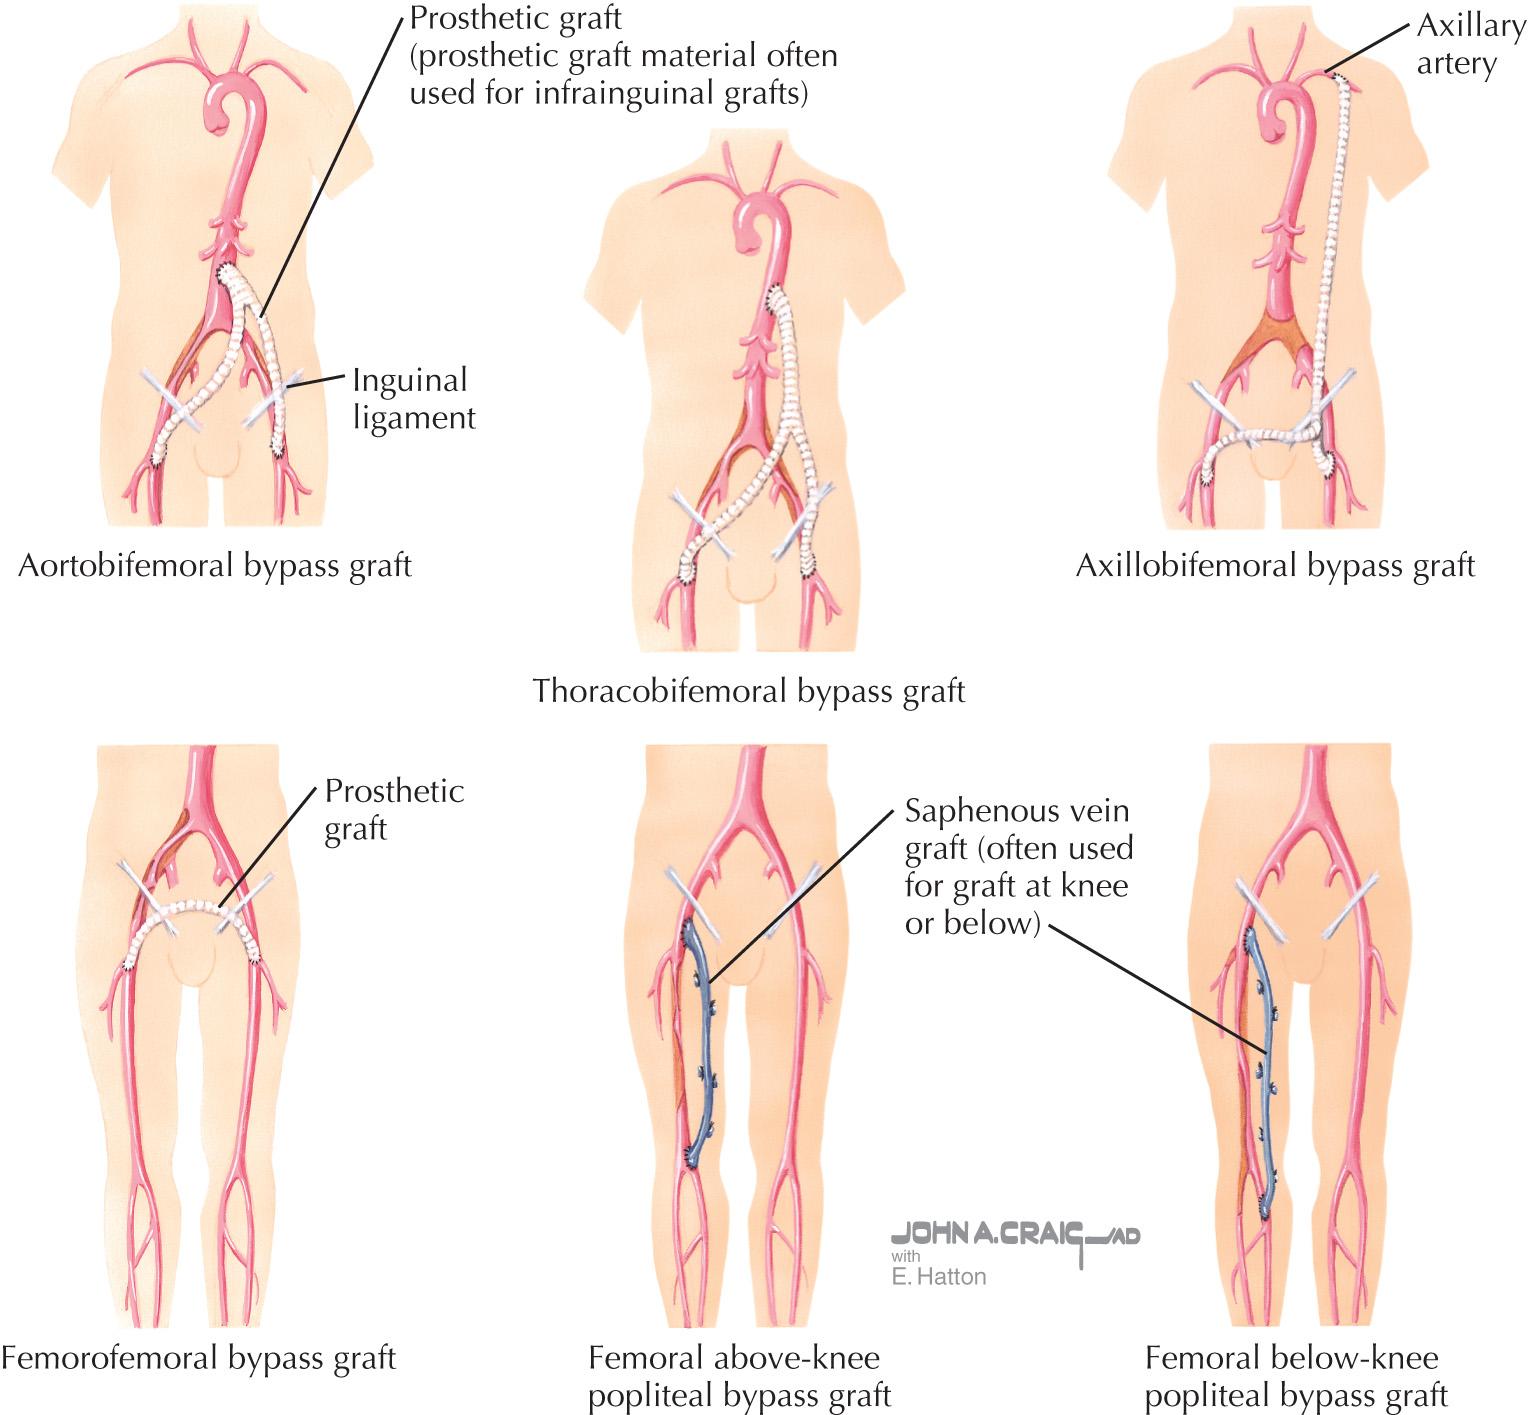 FIG 60.3, Surgical Management of Peripheral Arterial Disease of the Lower Extremities.